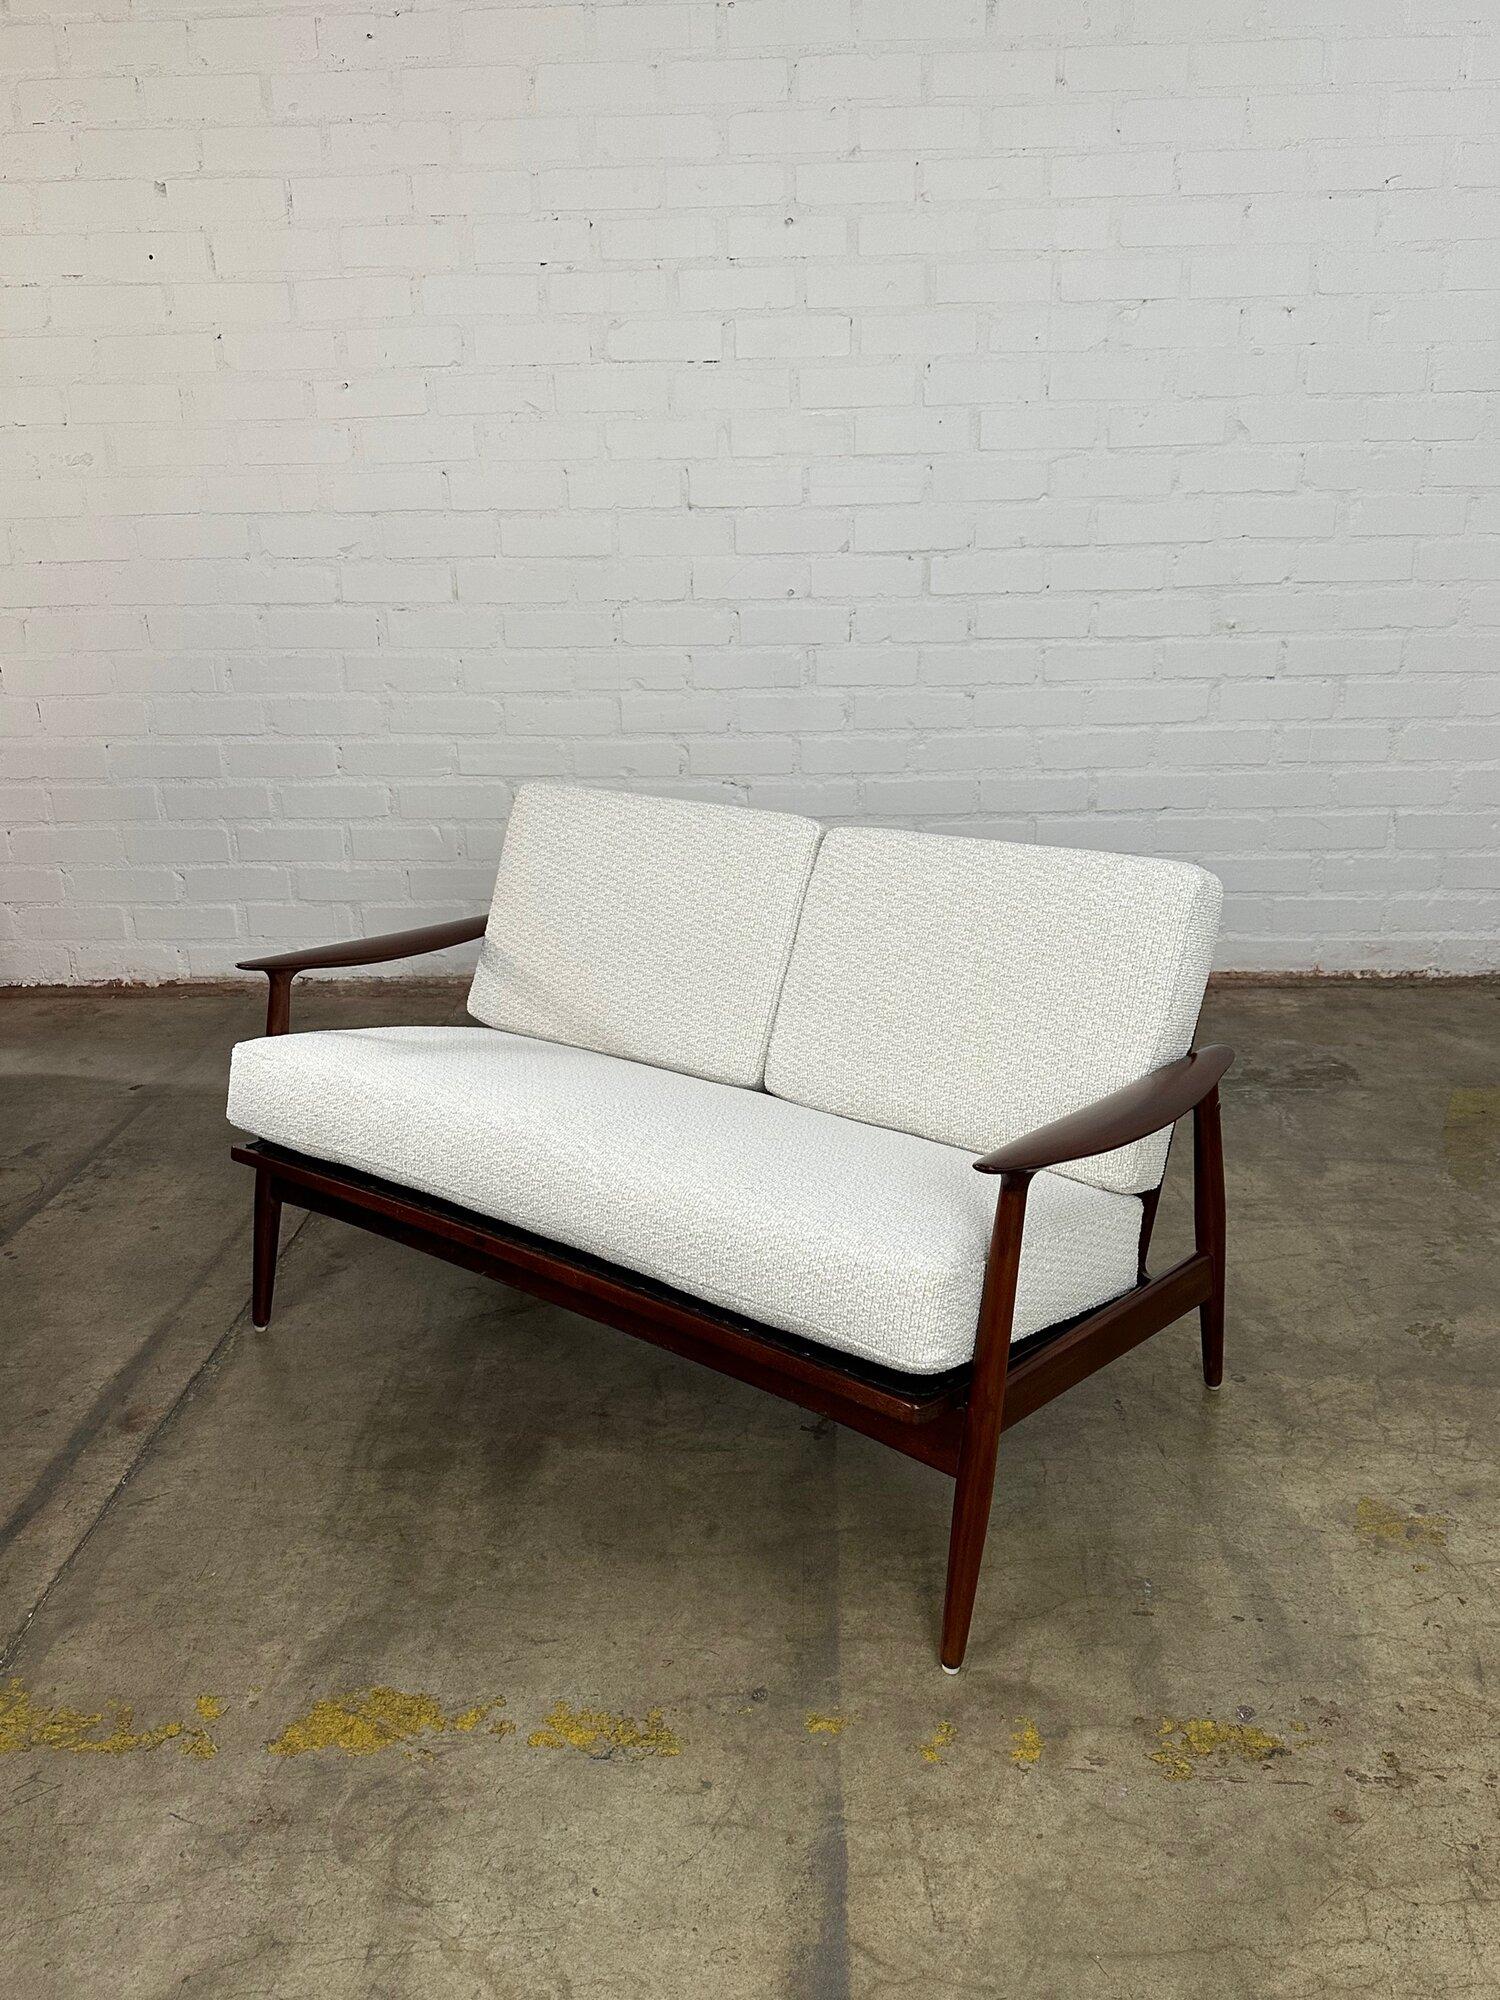 W52.5 D31 H28 SW46 SD19 SH20 AH22

Fully refinished Mid century Danish loveseat. Made out of solid teak, item is structurally sound with new foam and fabric.